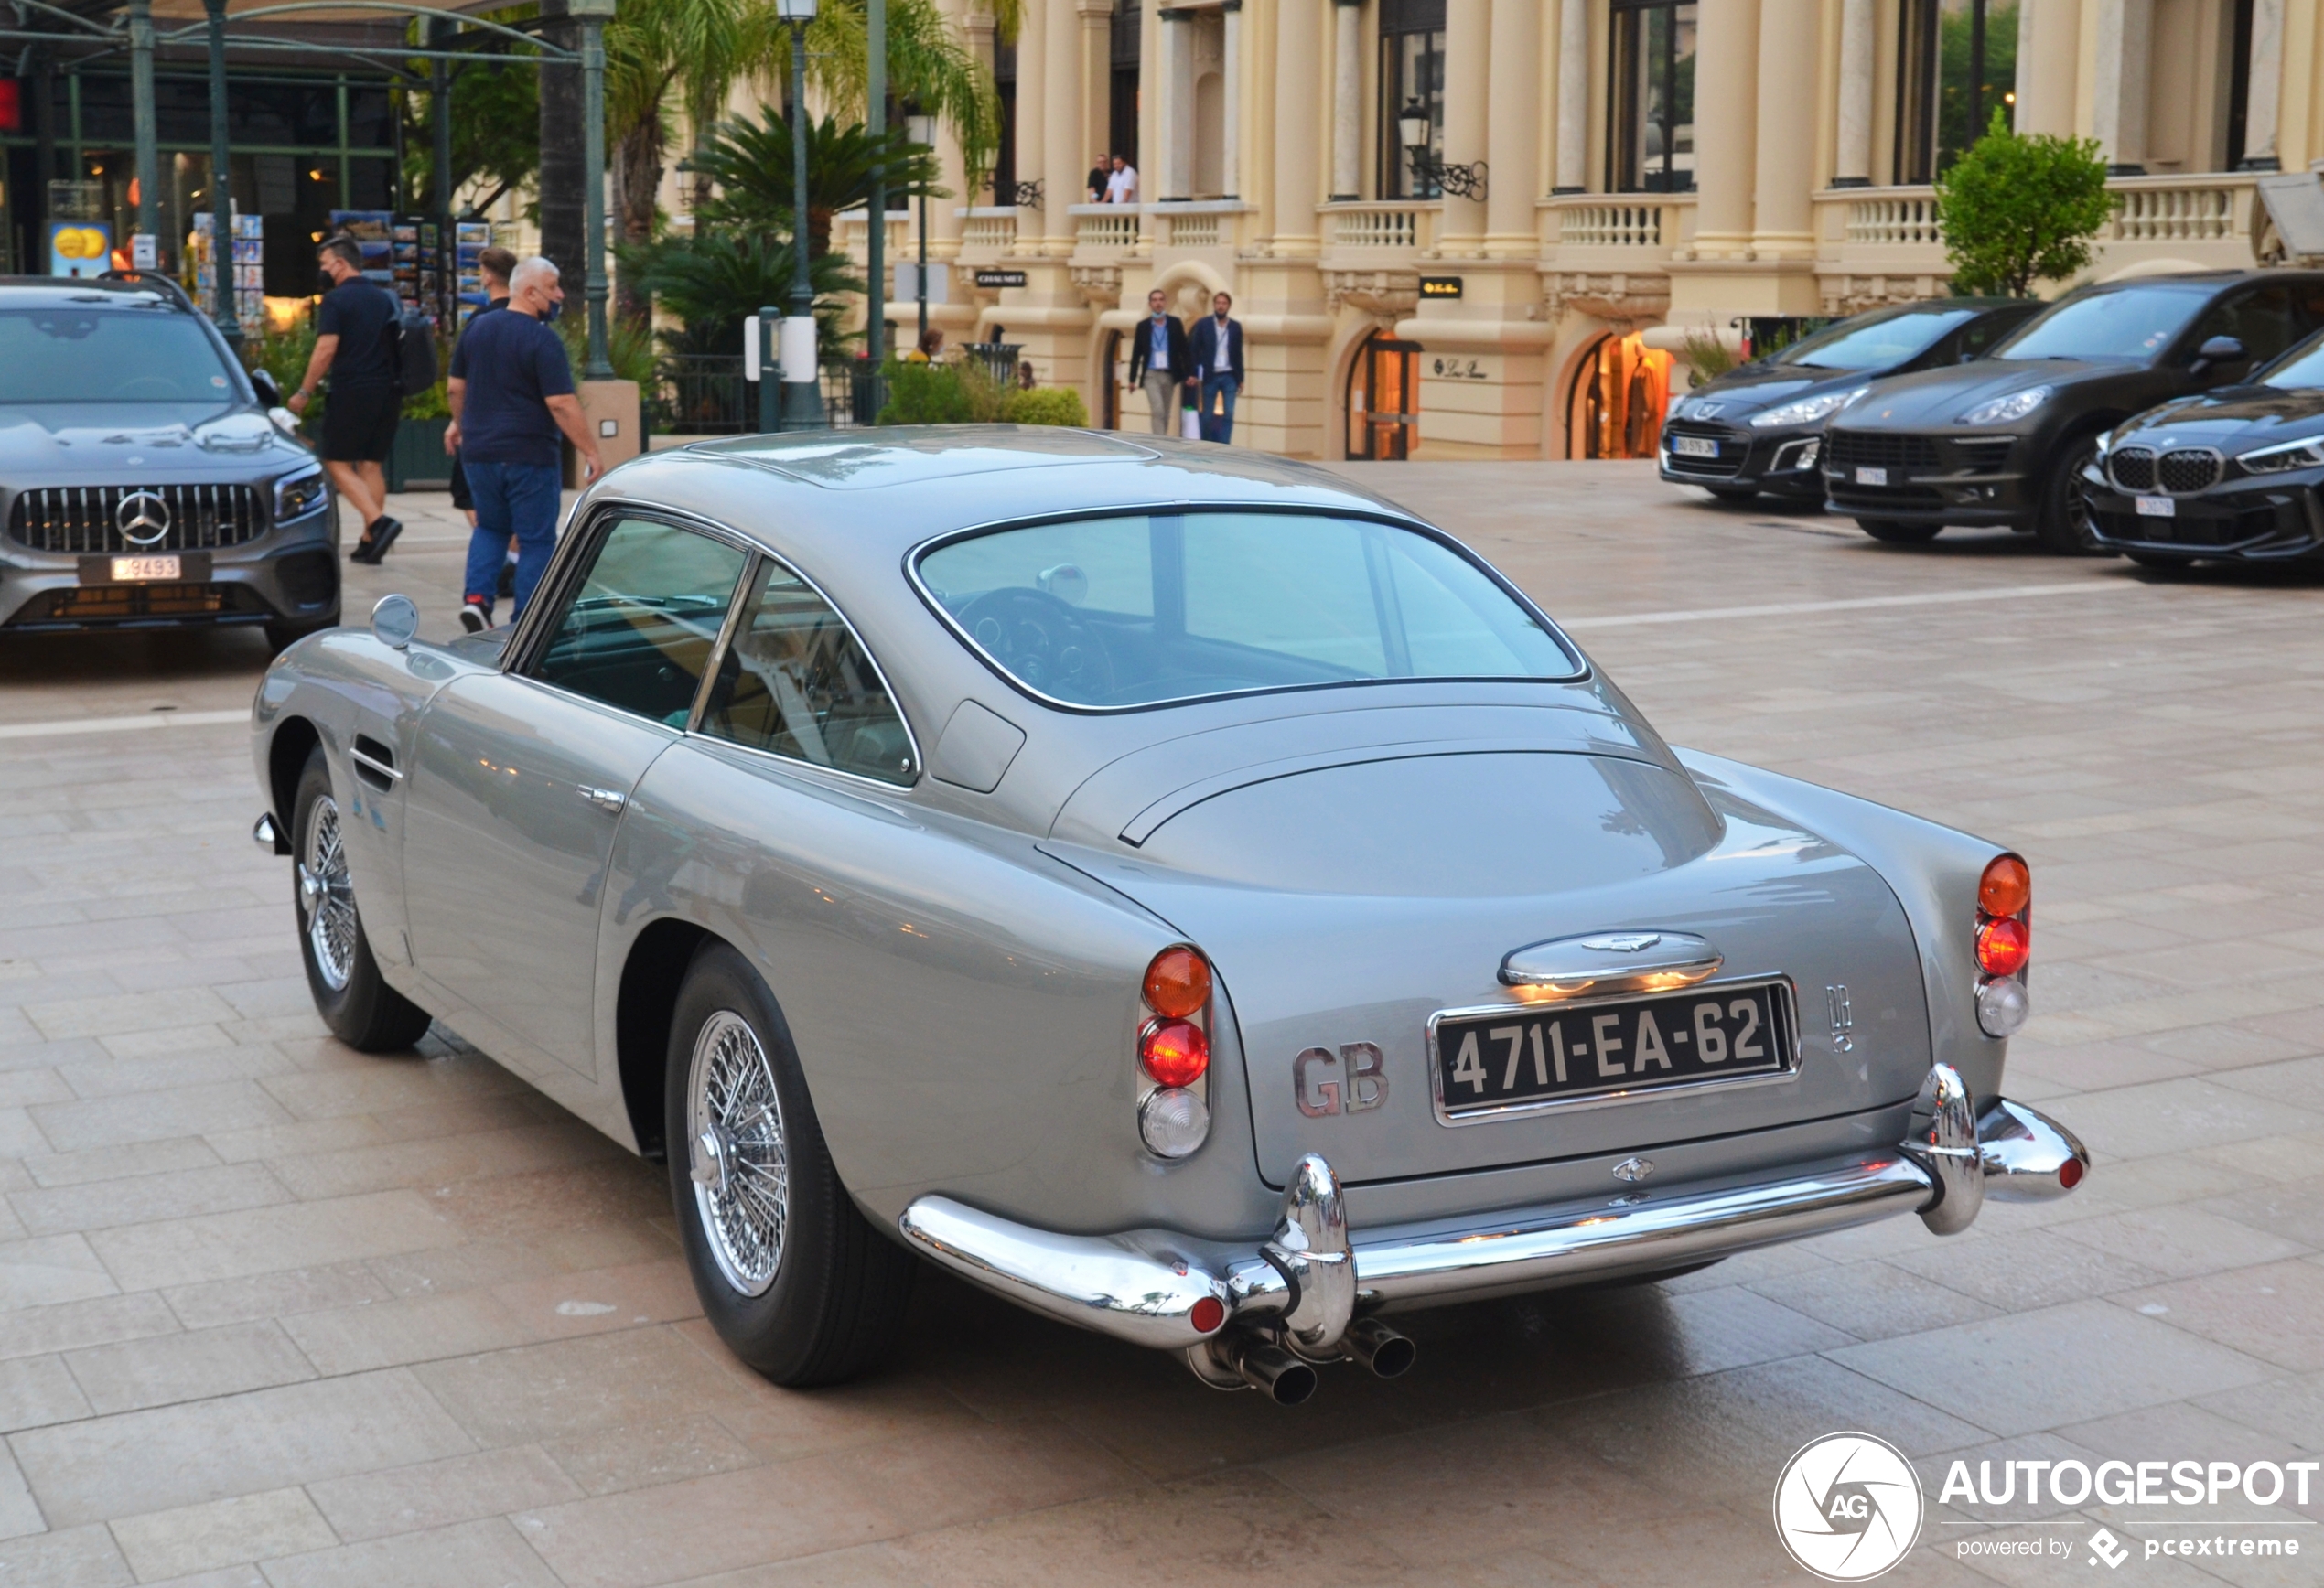 Aston Martin DB5 Goldfiner Continuation slipped in between